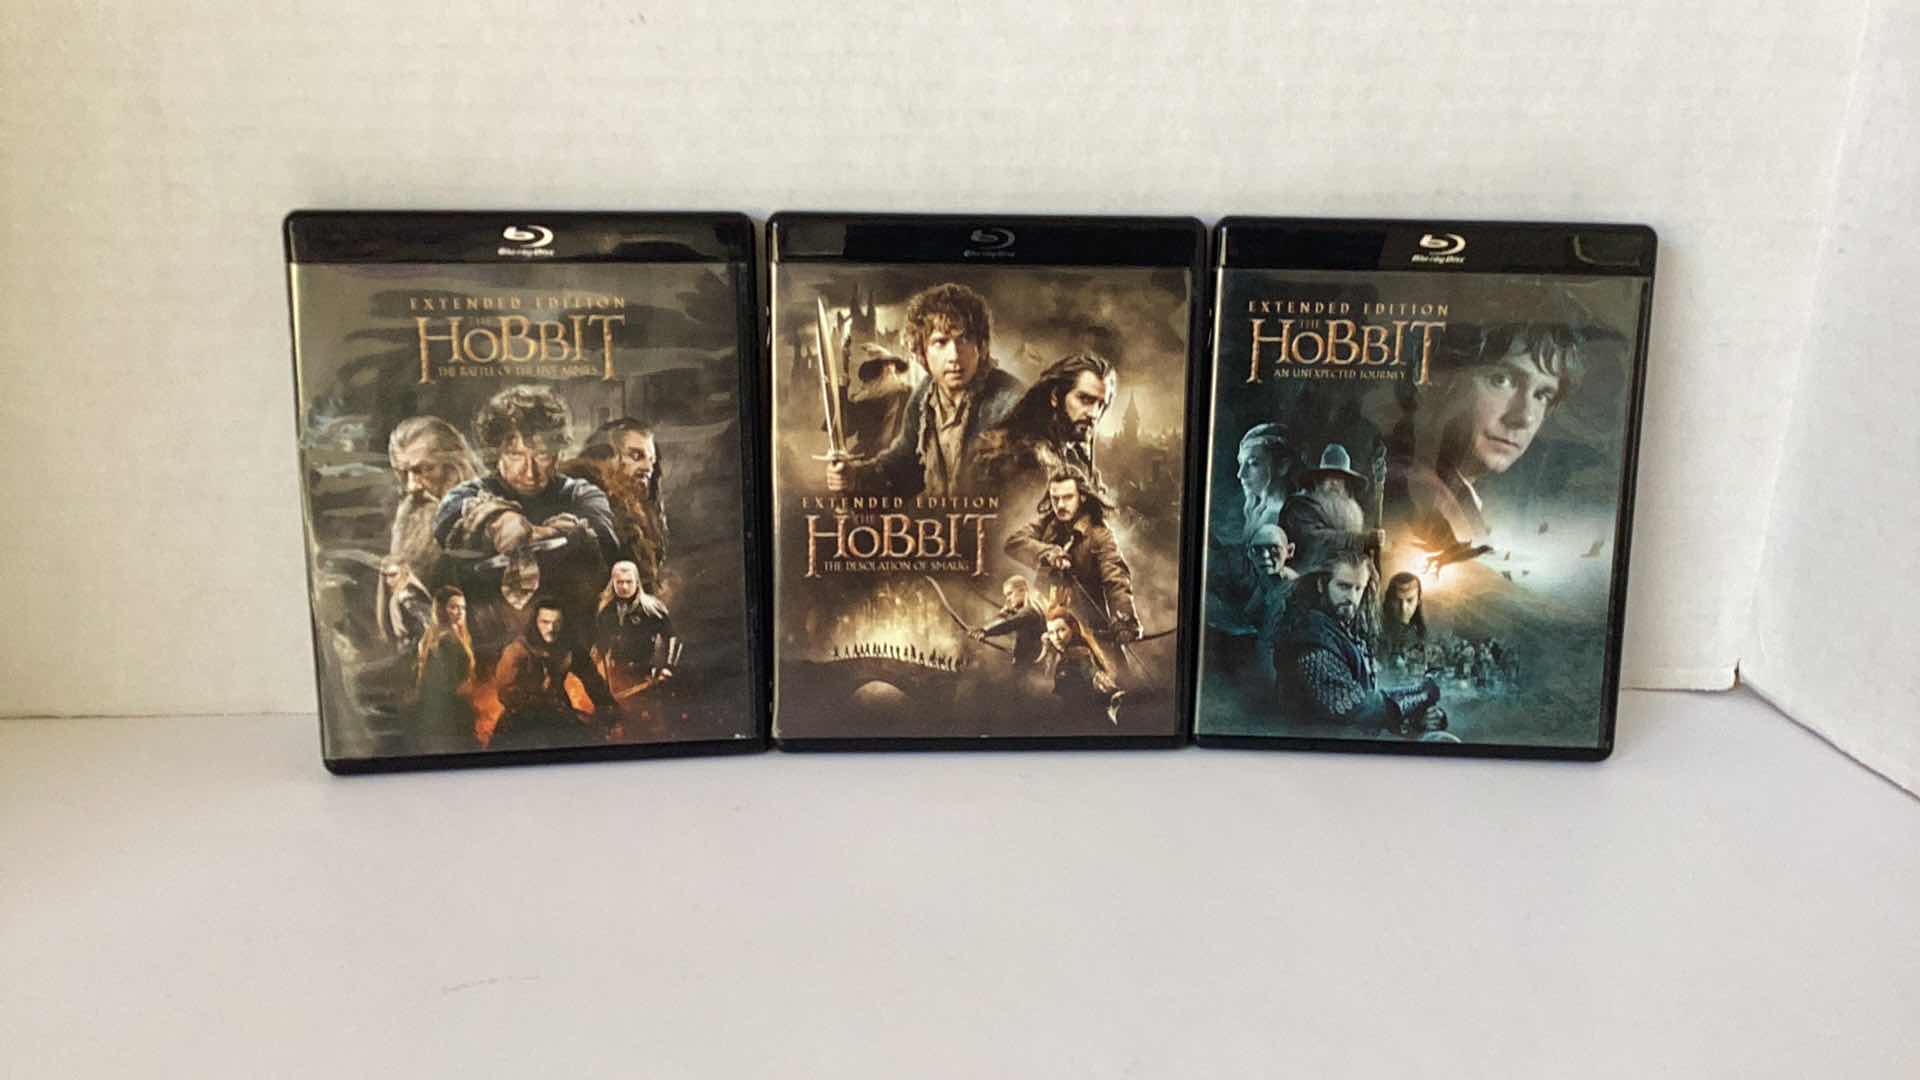 Photo 1 of 3 EXTENDED EDITION HOBBIT MOVIES